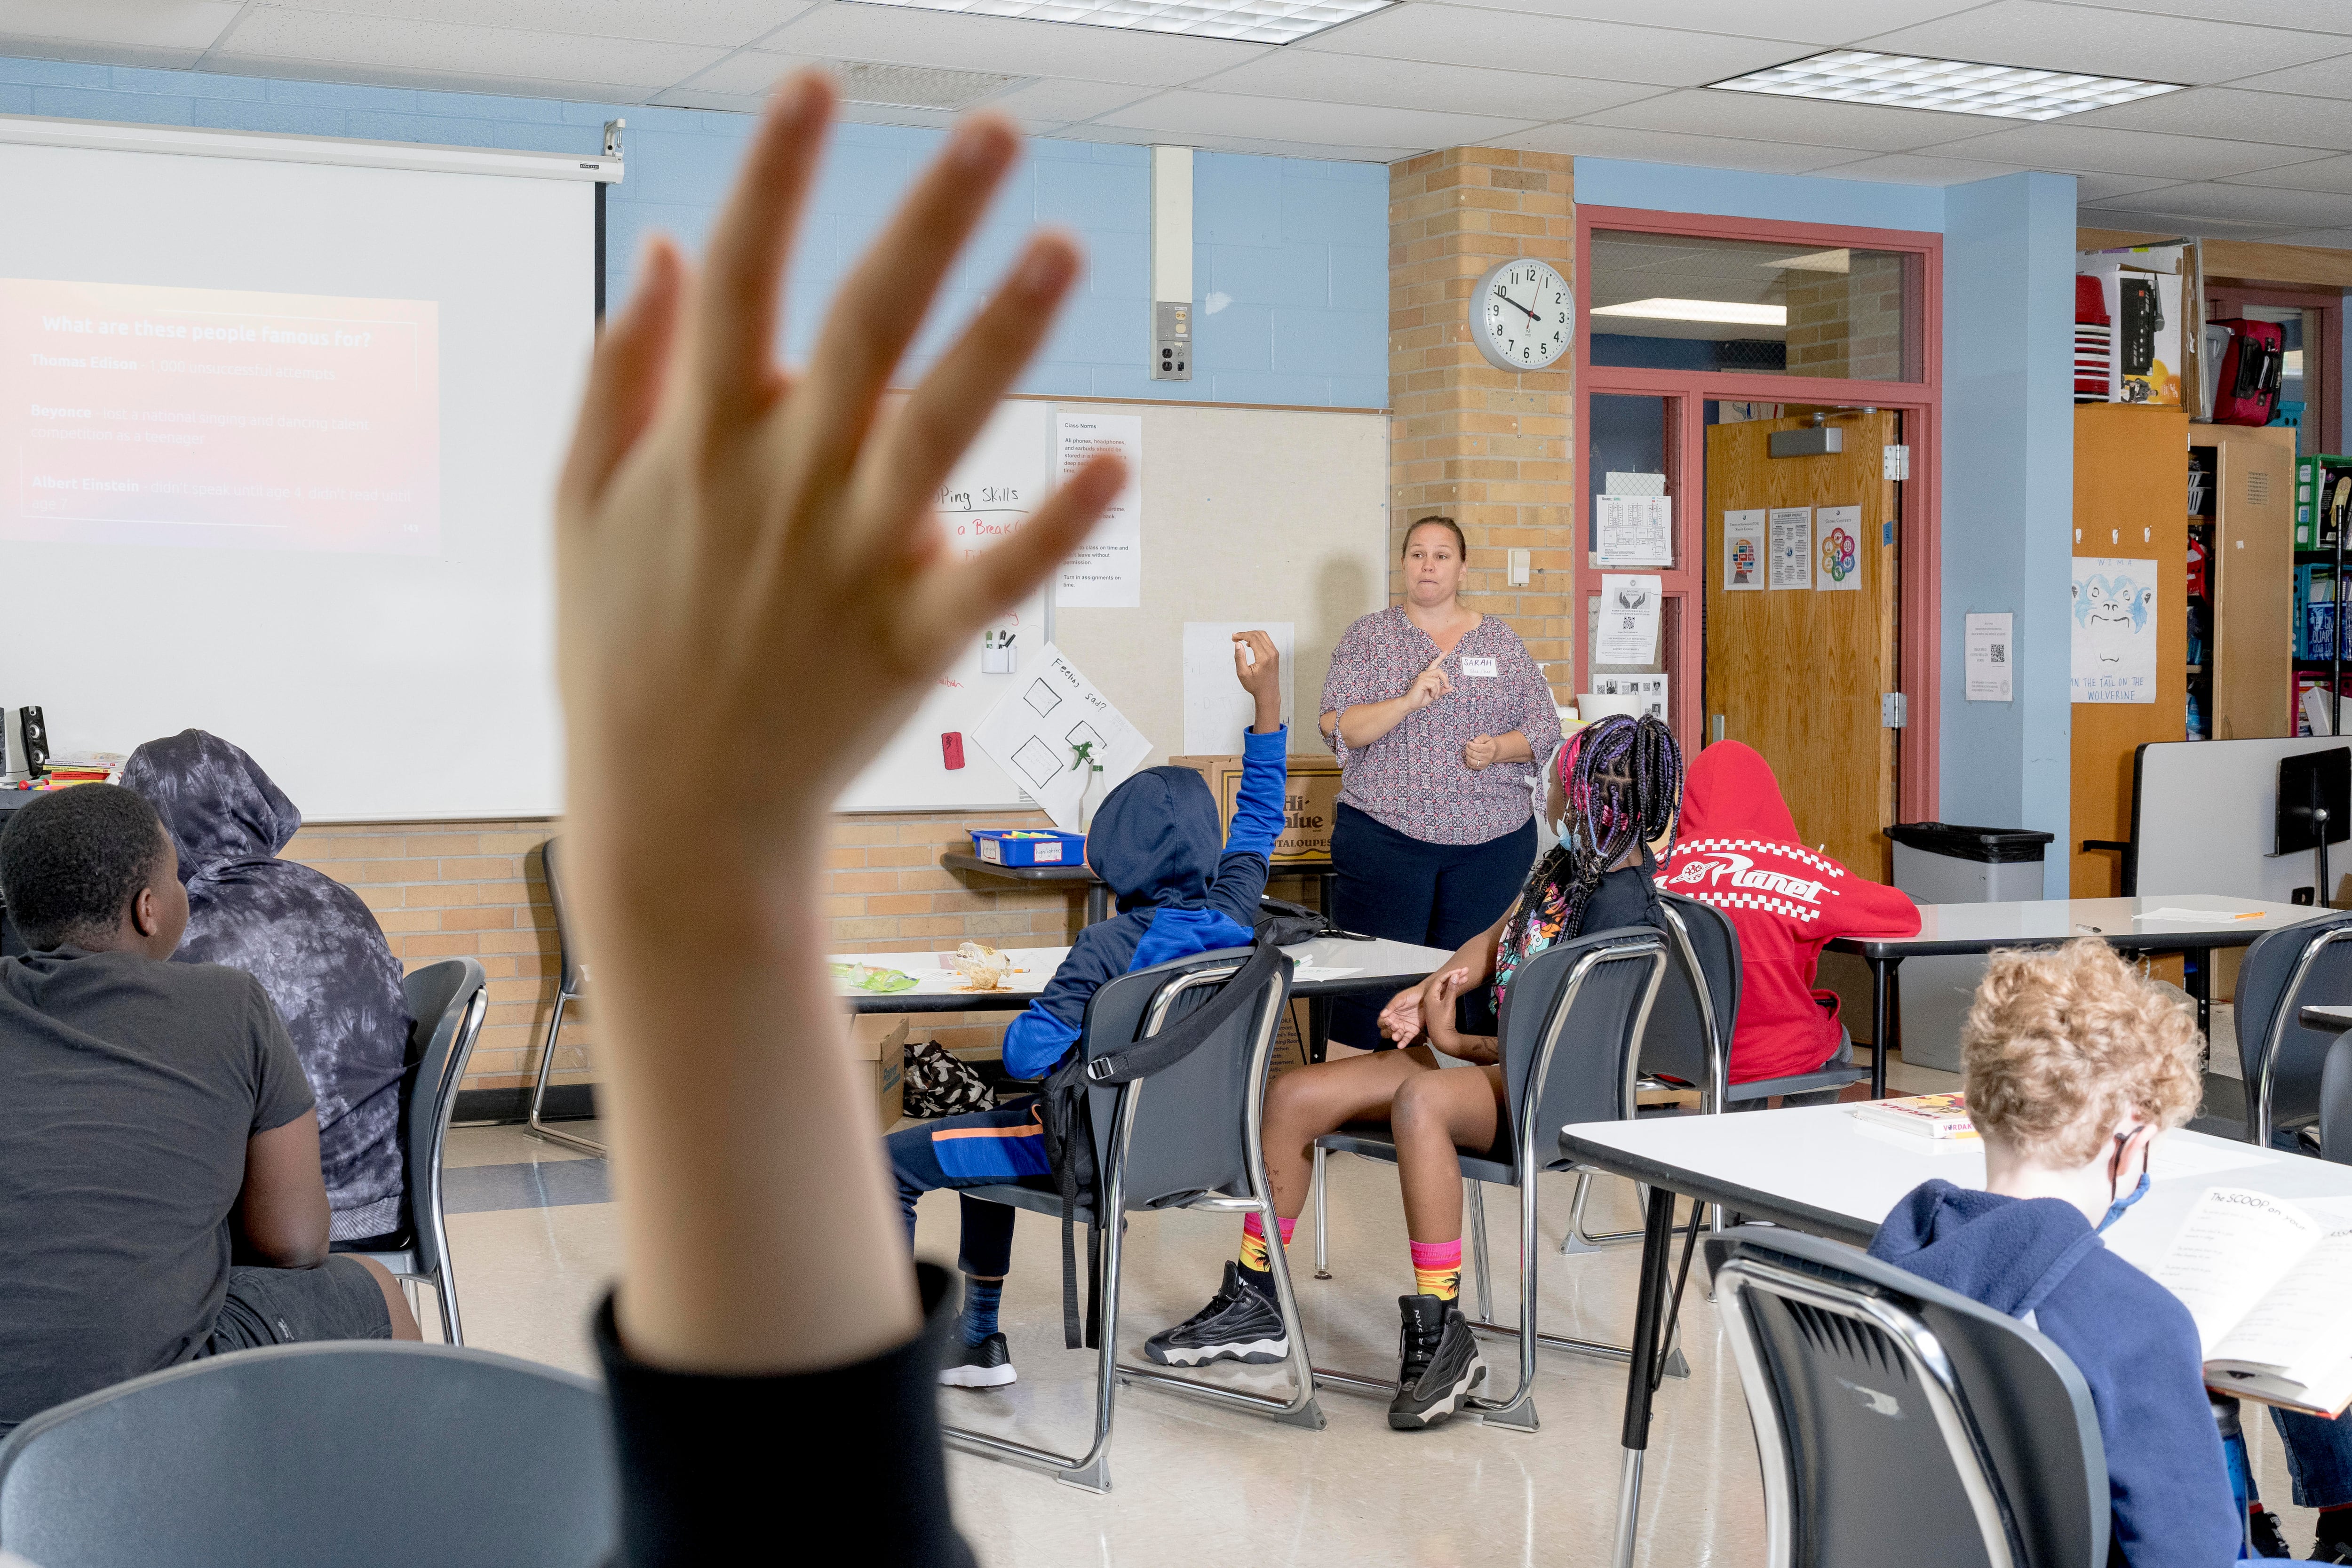 Several students sit at desks in a large classroom. Two of them raise their hands while a teacher stands at the front of the room.